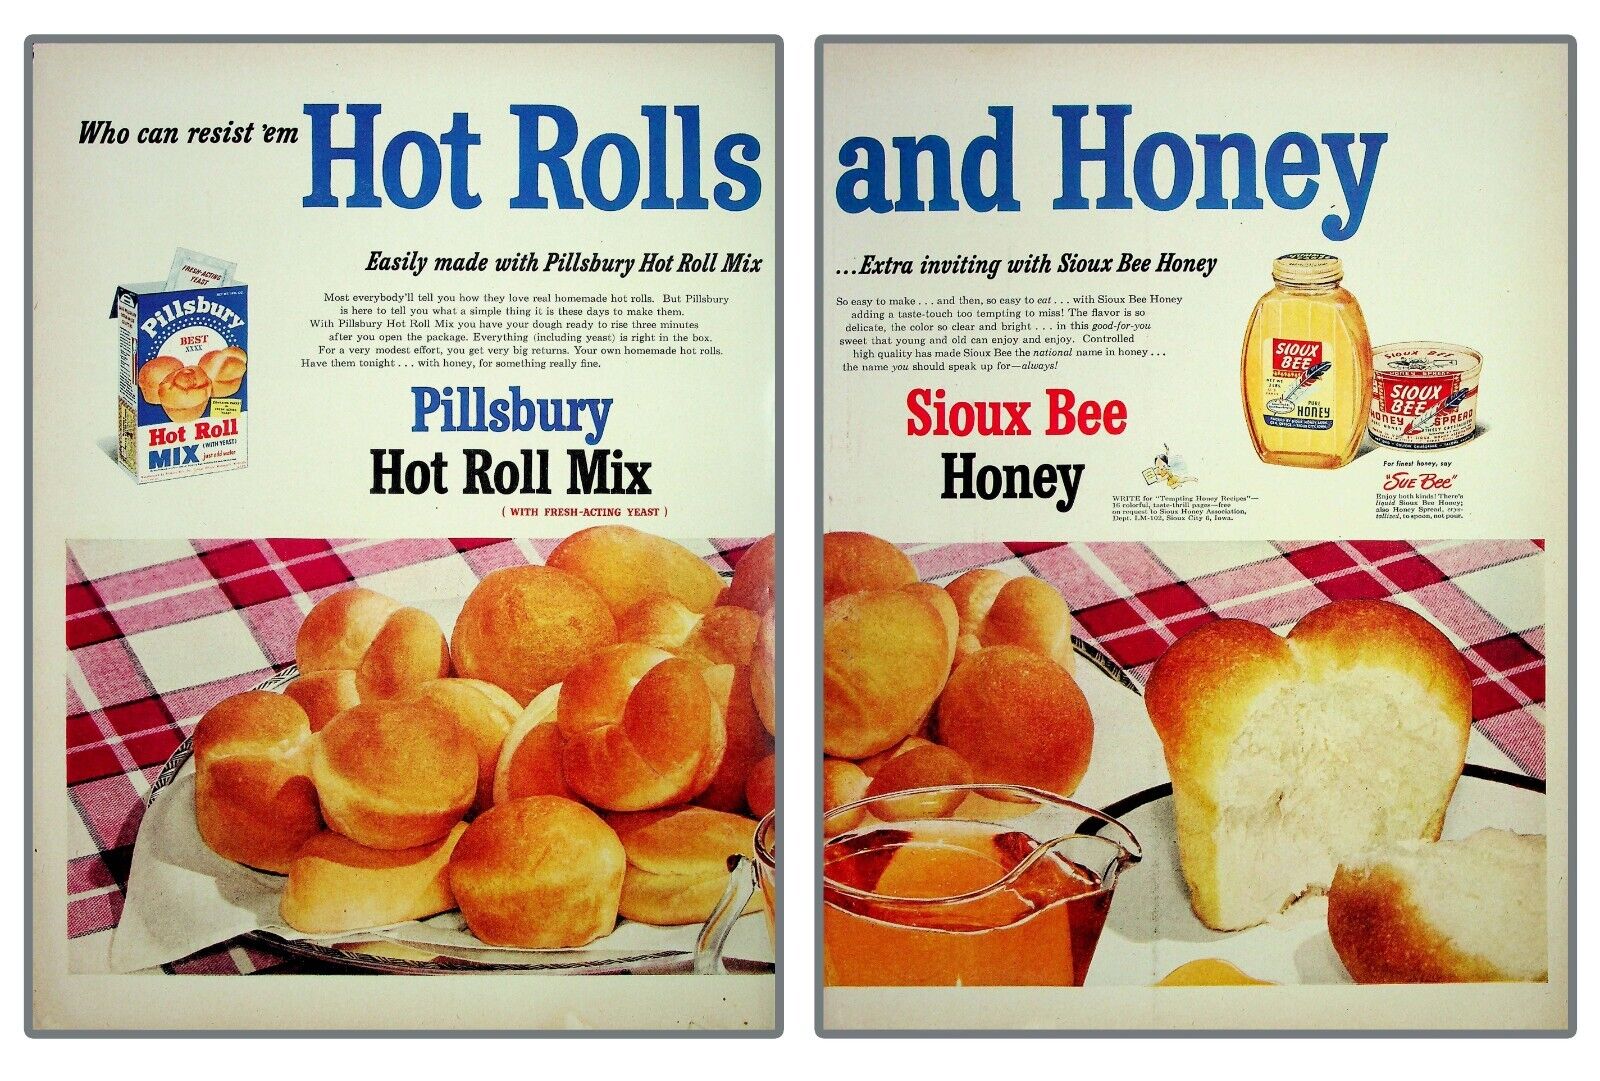 Pillsbury Hot Roll Sioux Bee Hone Wall Art Décor Vintage Print Ad 1952 2 pager